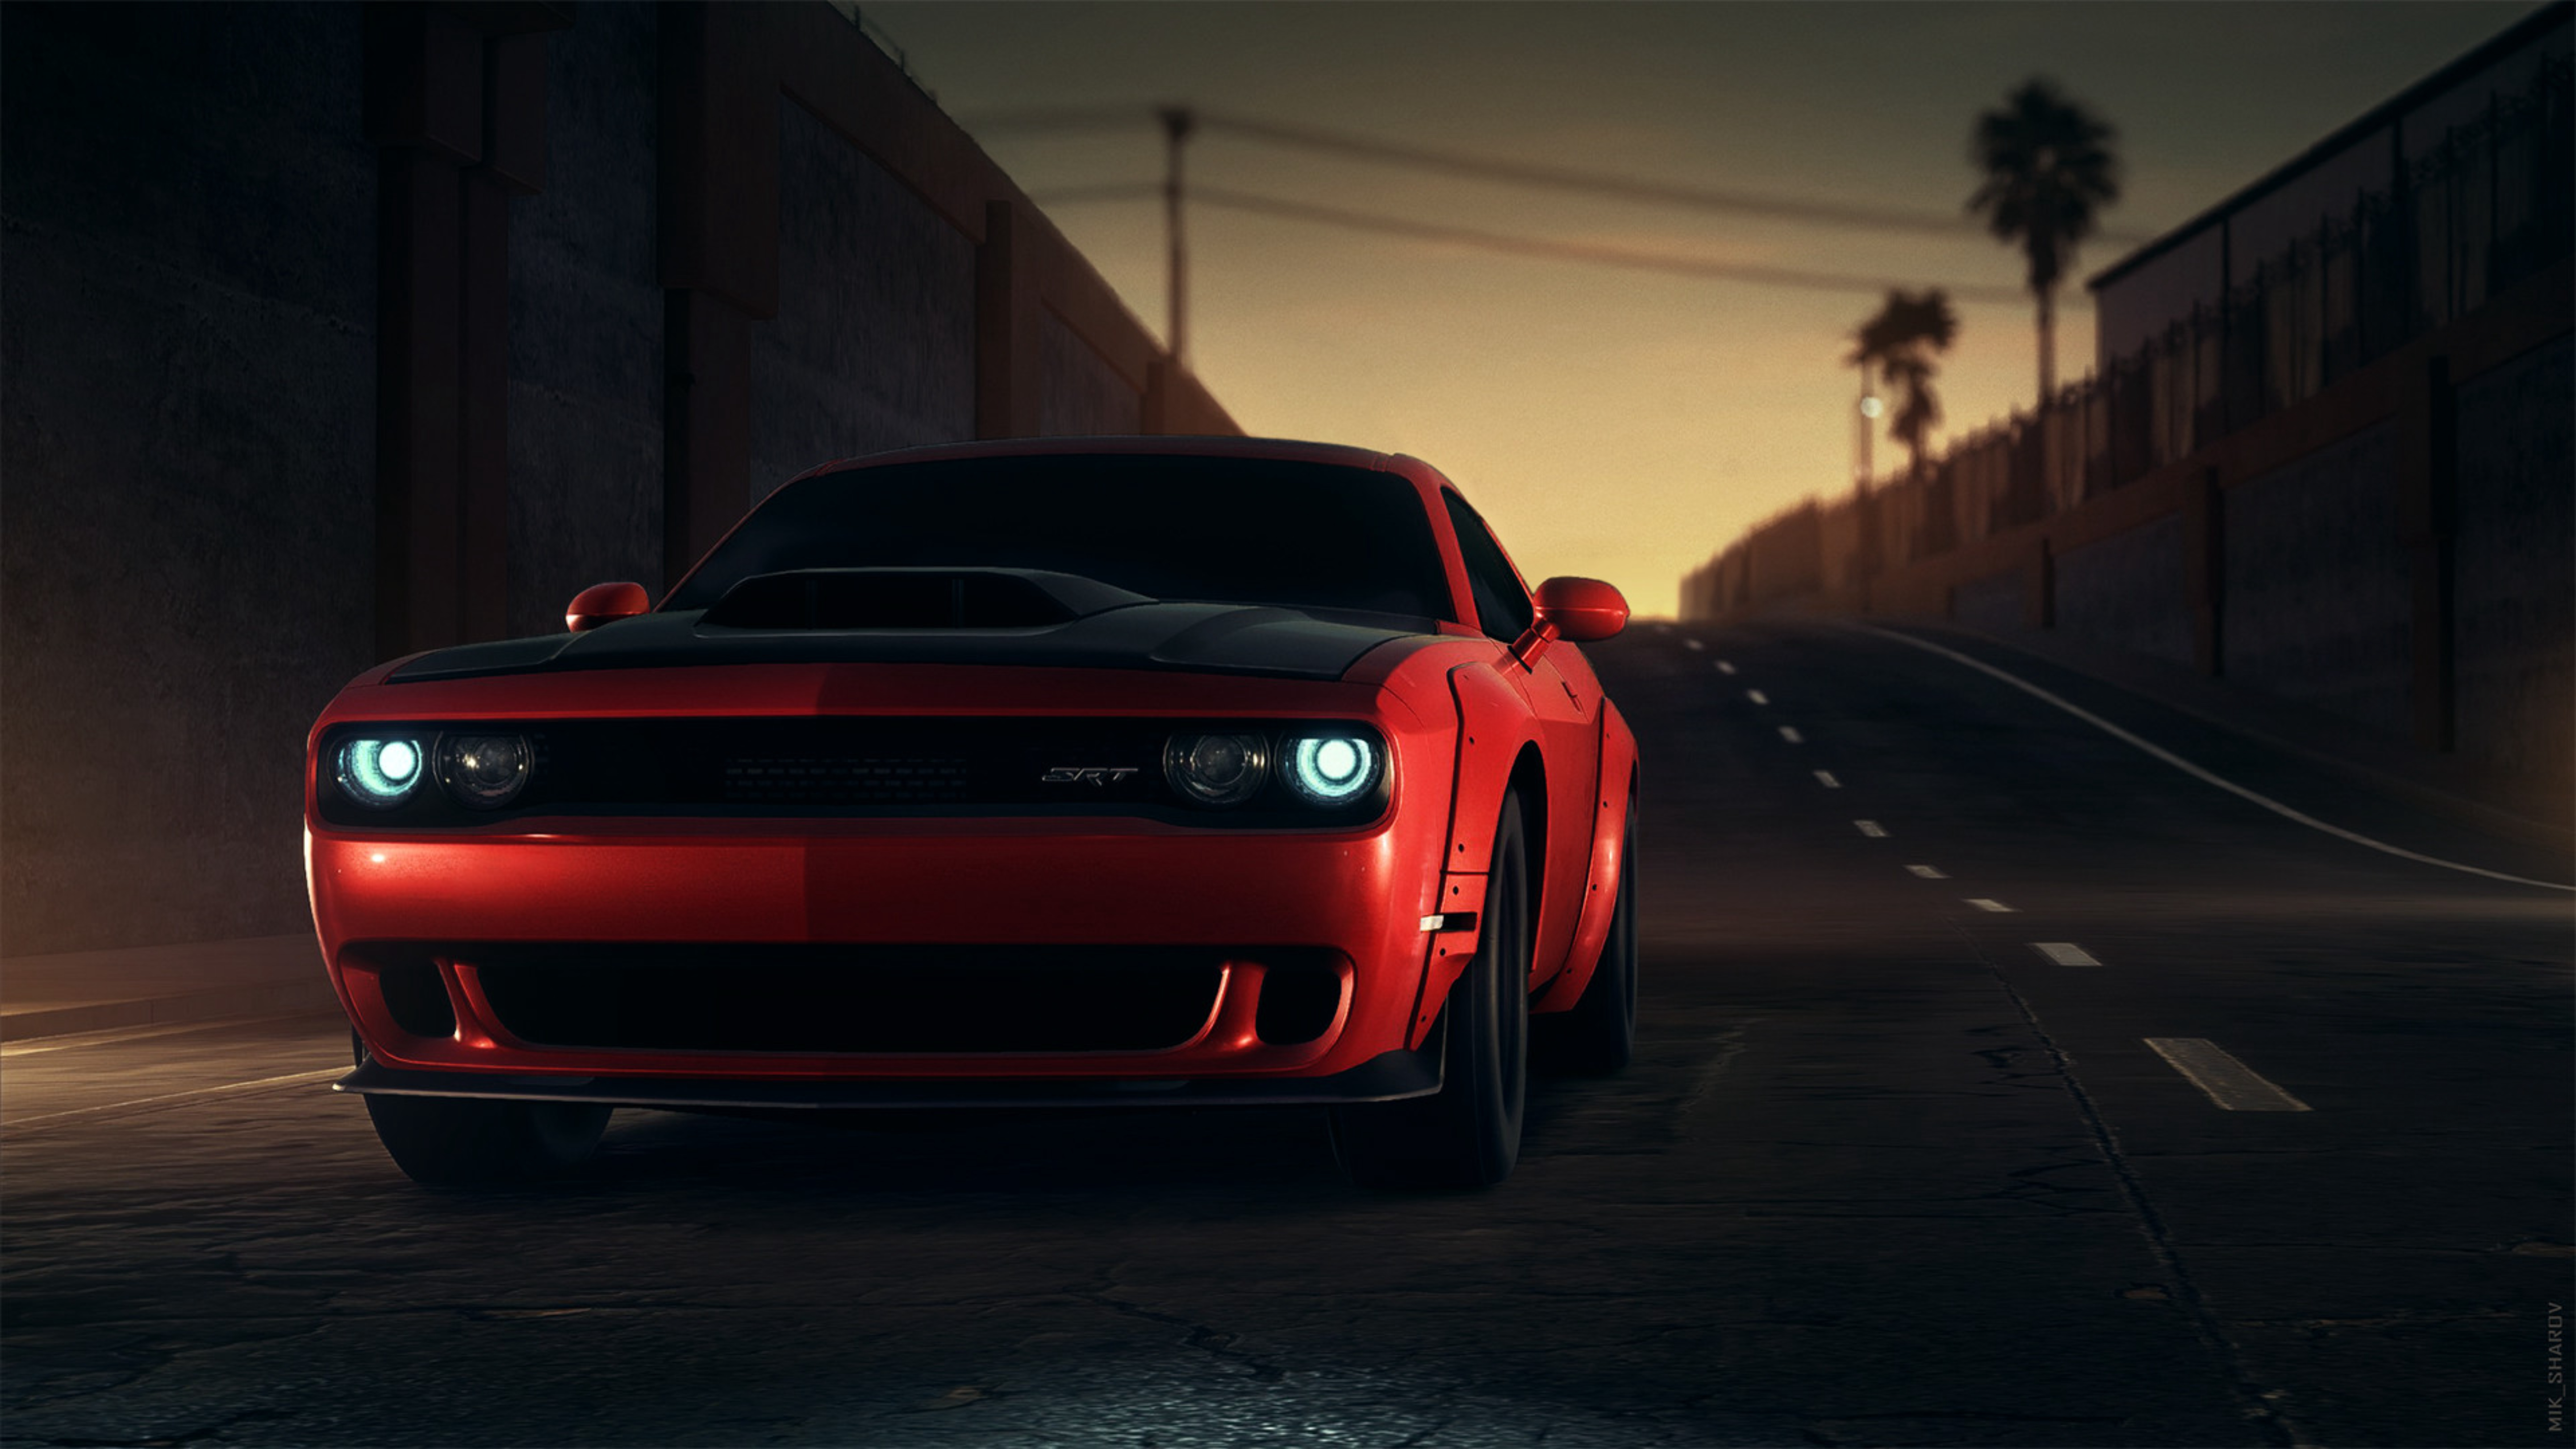 wallpapers cars, sports car, front view, headlights, dodge srt, dodge, sports, red, lights